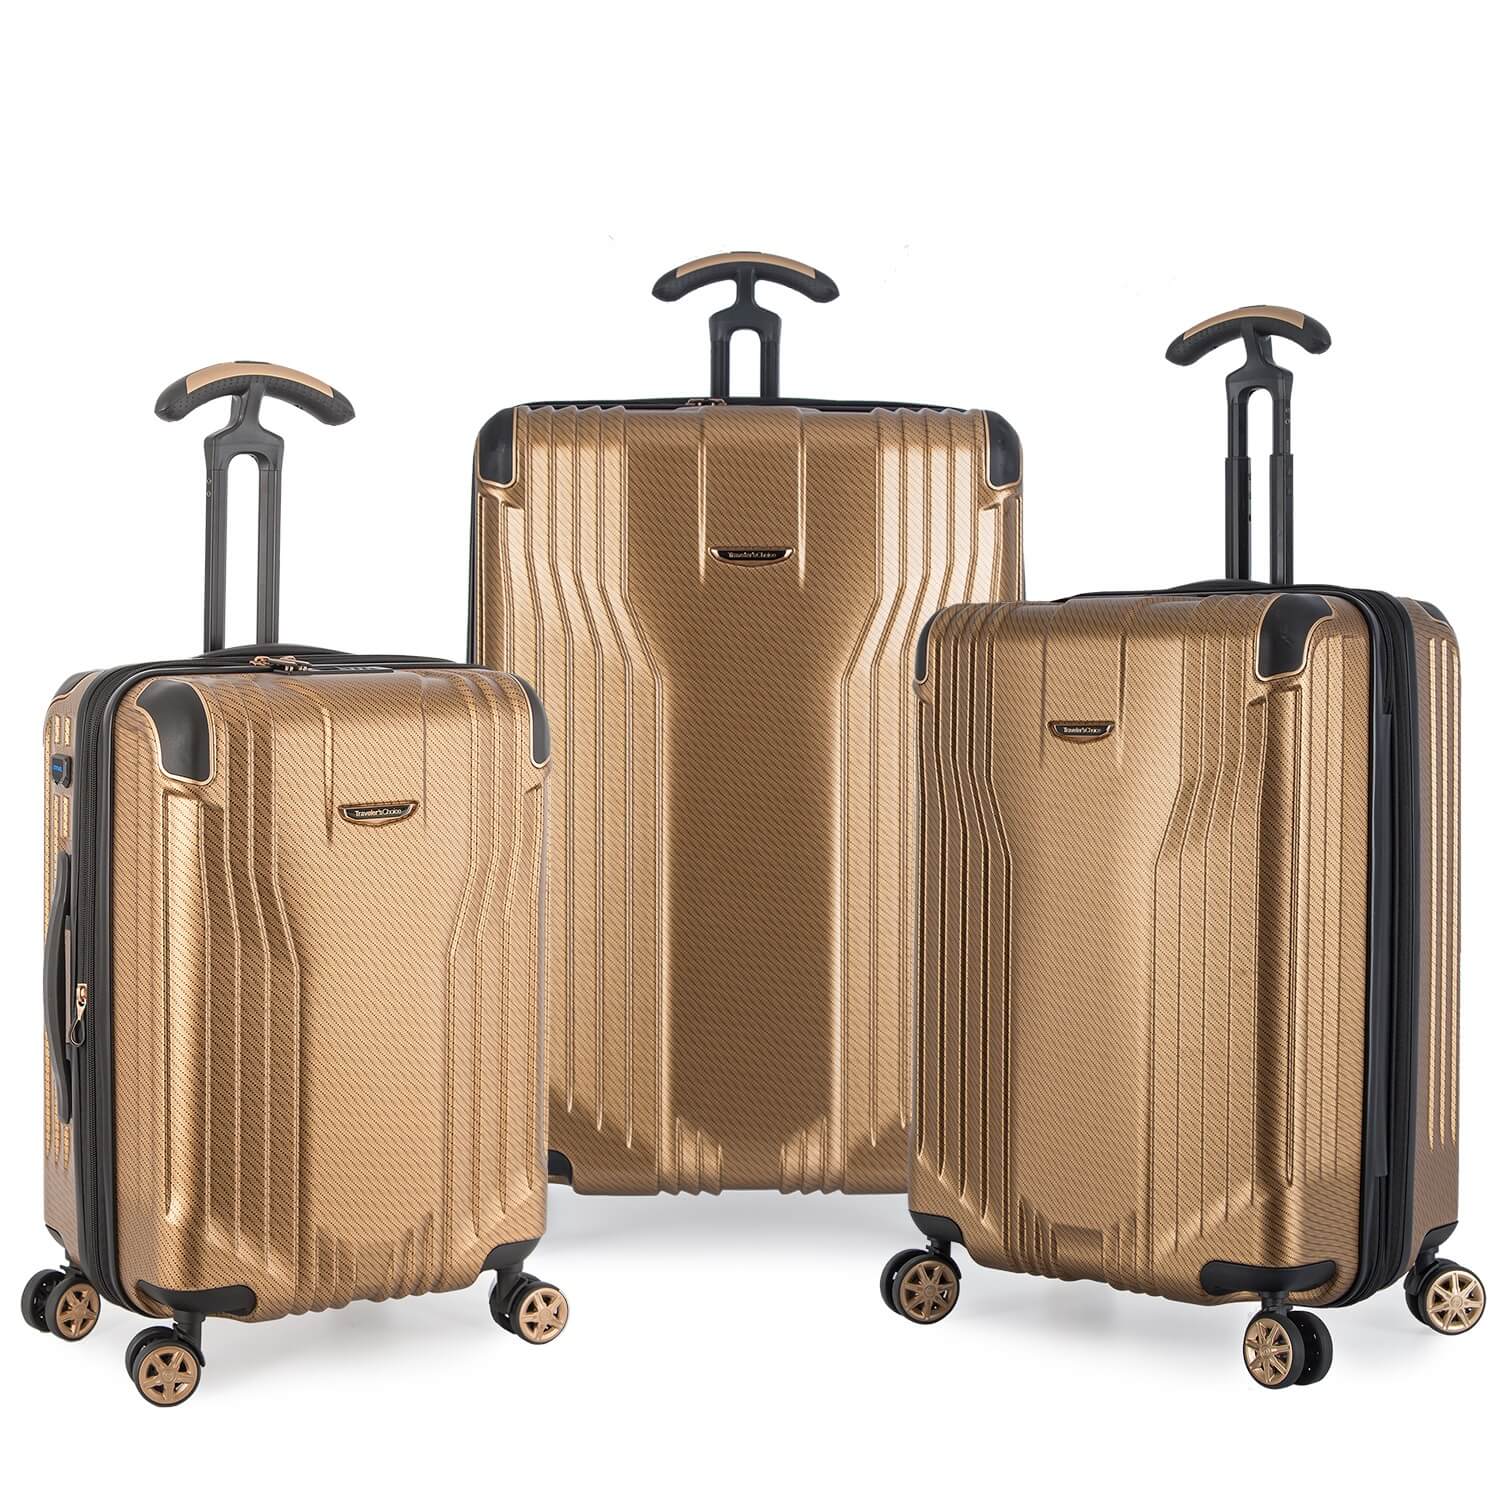 3 Piece Luggage Suitcase Set with 4 Spinner Wheels | Carry On with USB Port, Medium Checked, and Large Checked Suitcase-Suitcase clearance